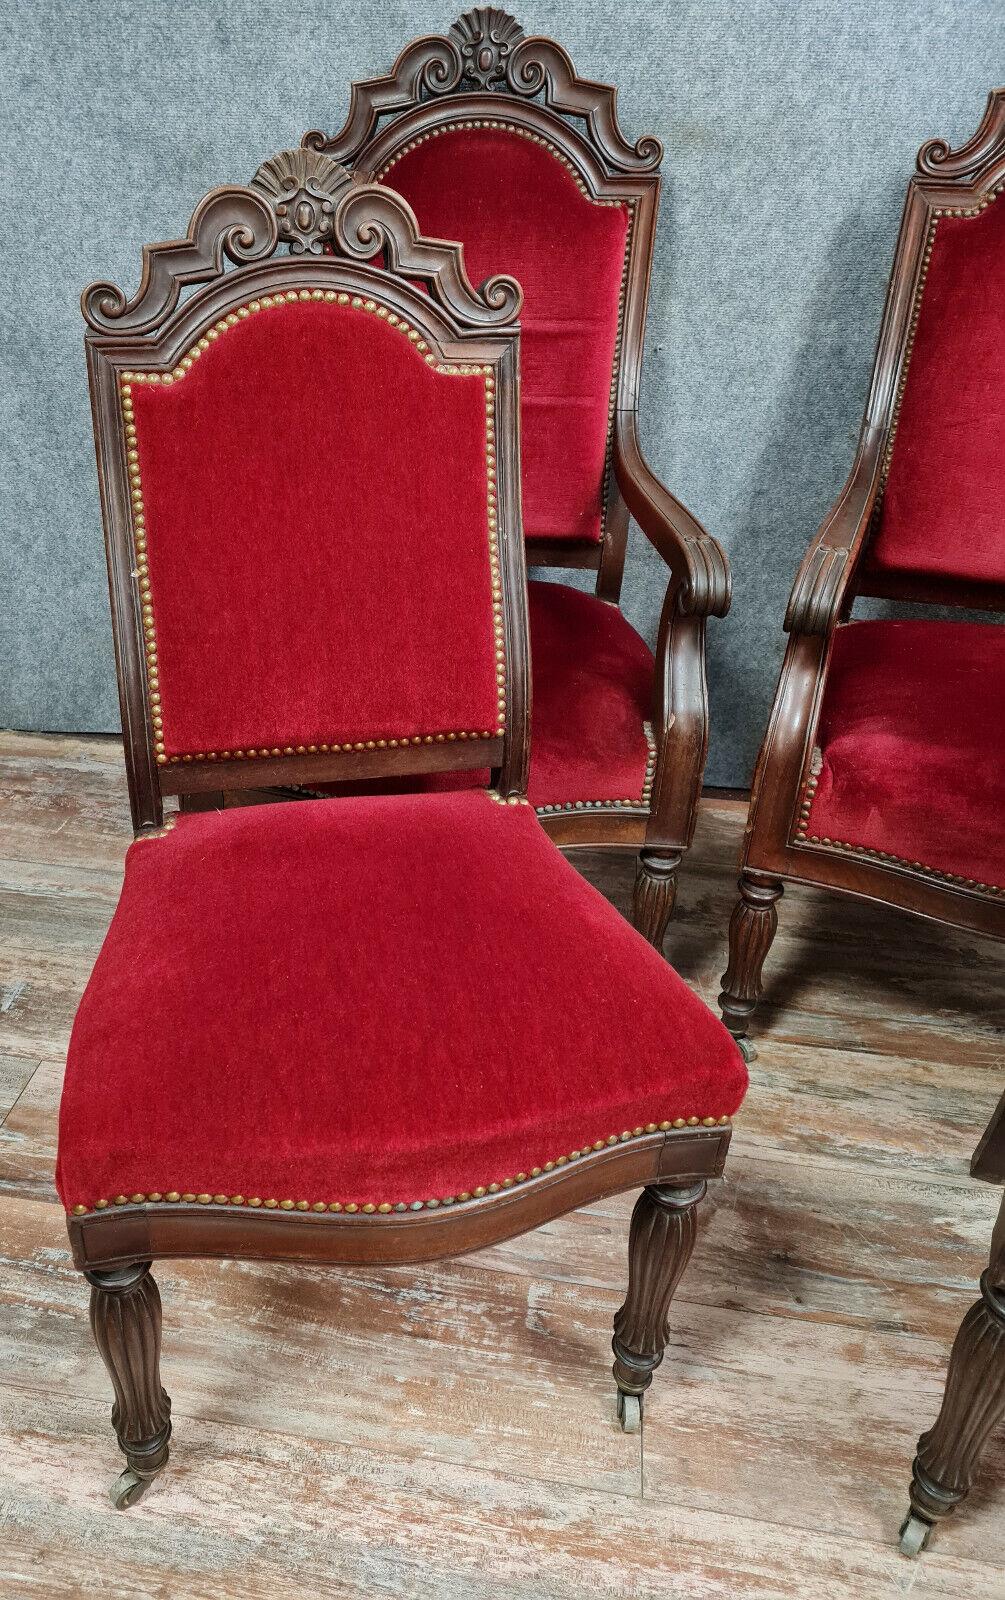 Exquisite Set of 4 Restauration Period Mahogany Chairs, circa 1820 -1X32 In Good Condition For Sale In Bordeaux, FR